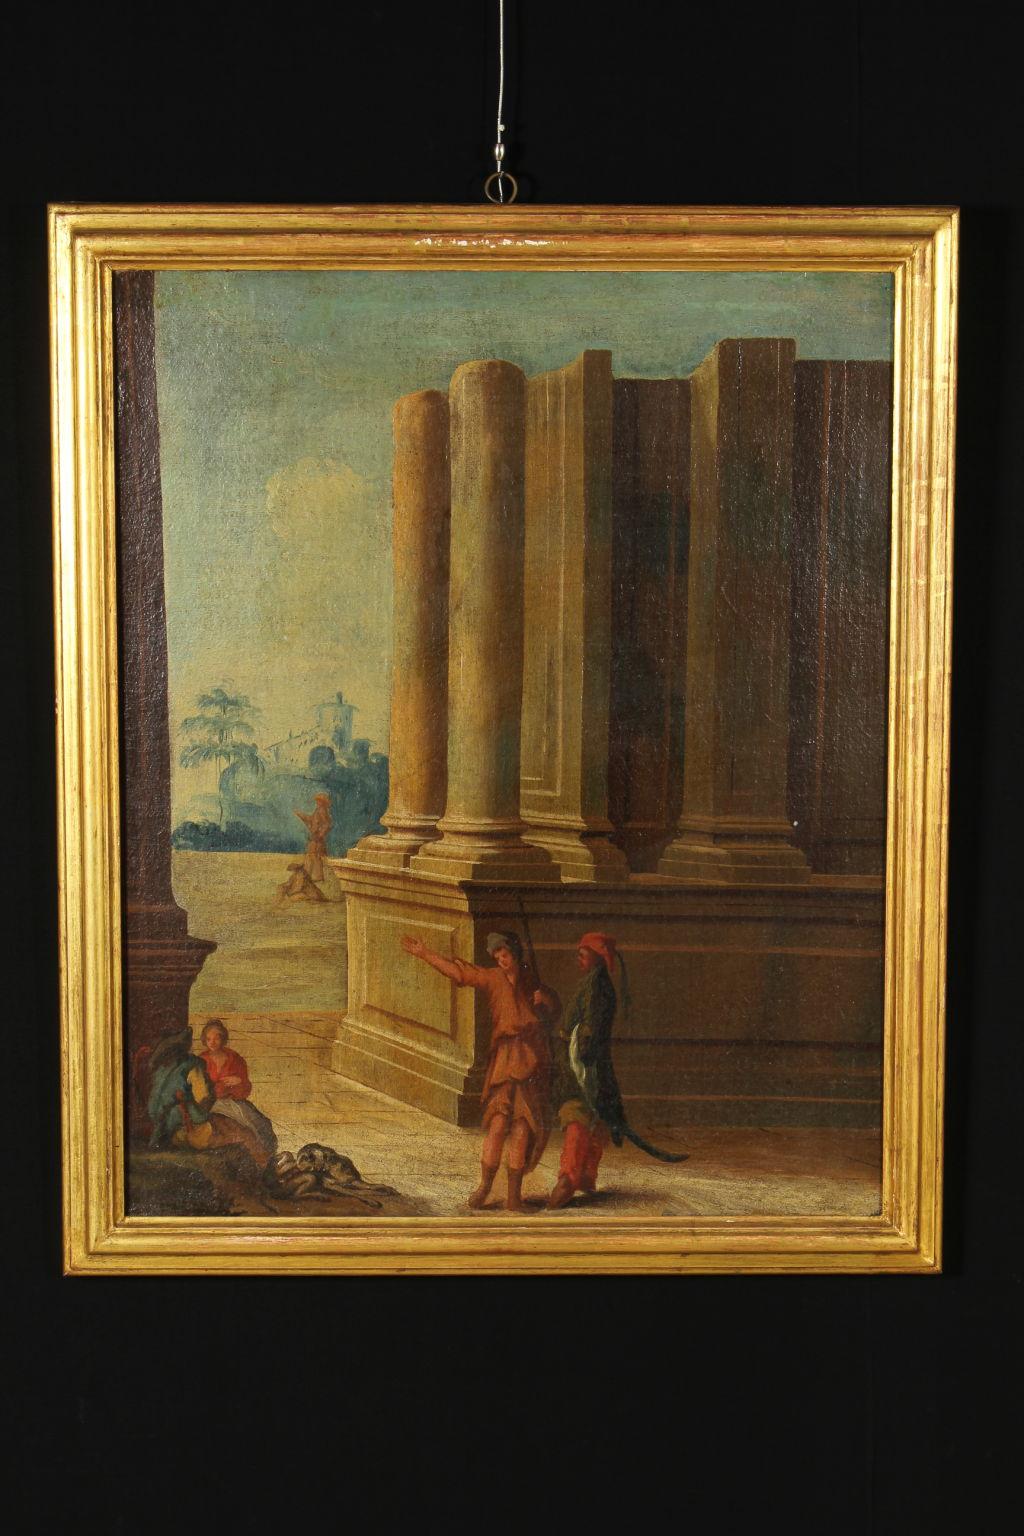 Unknown Landscape Painting - Landscapes with Architectural Buildings and Figures 18th Century